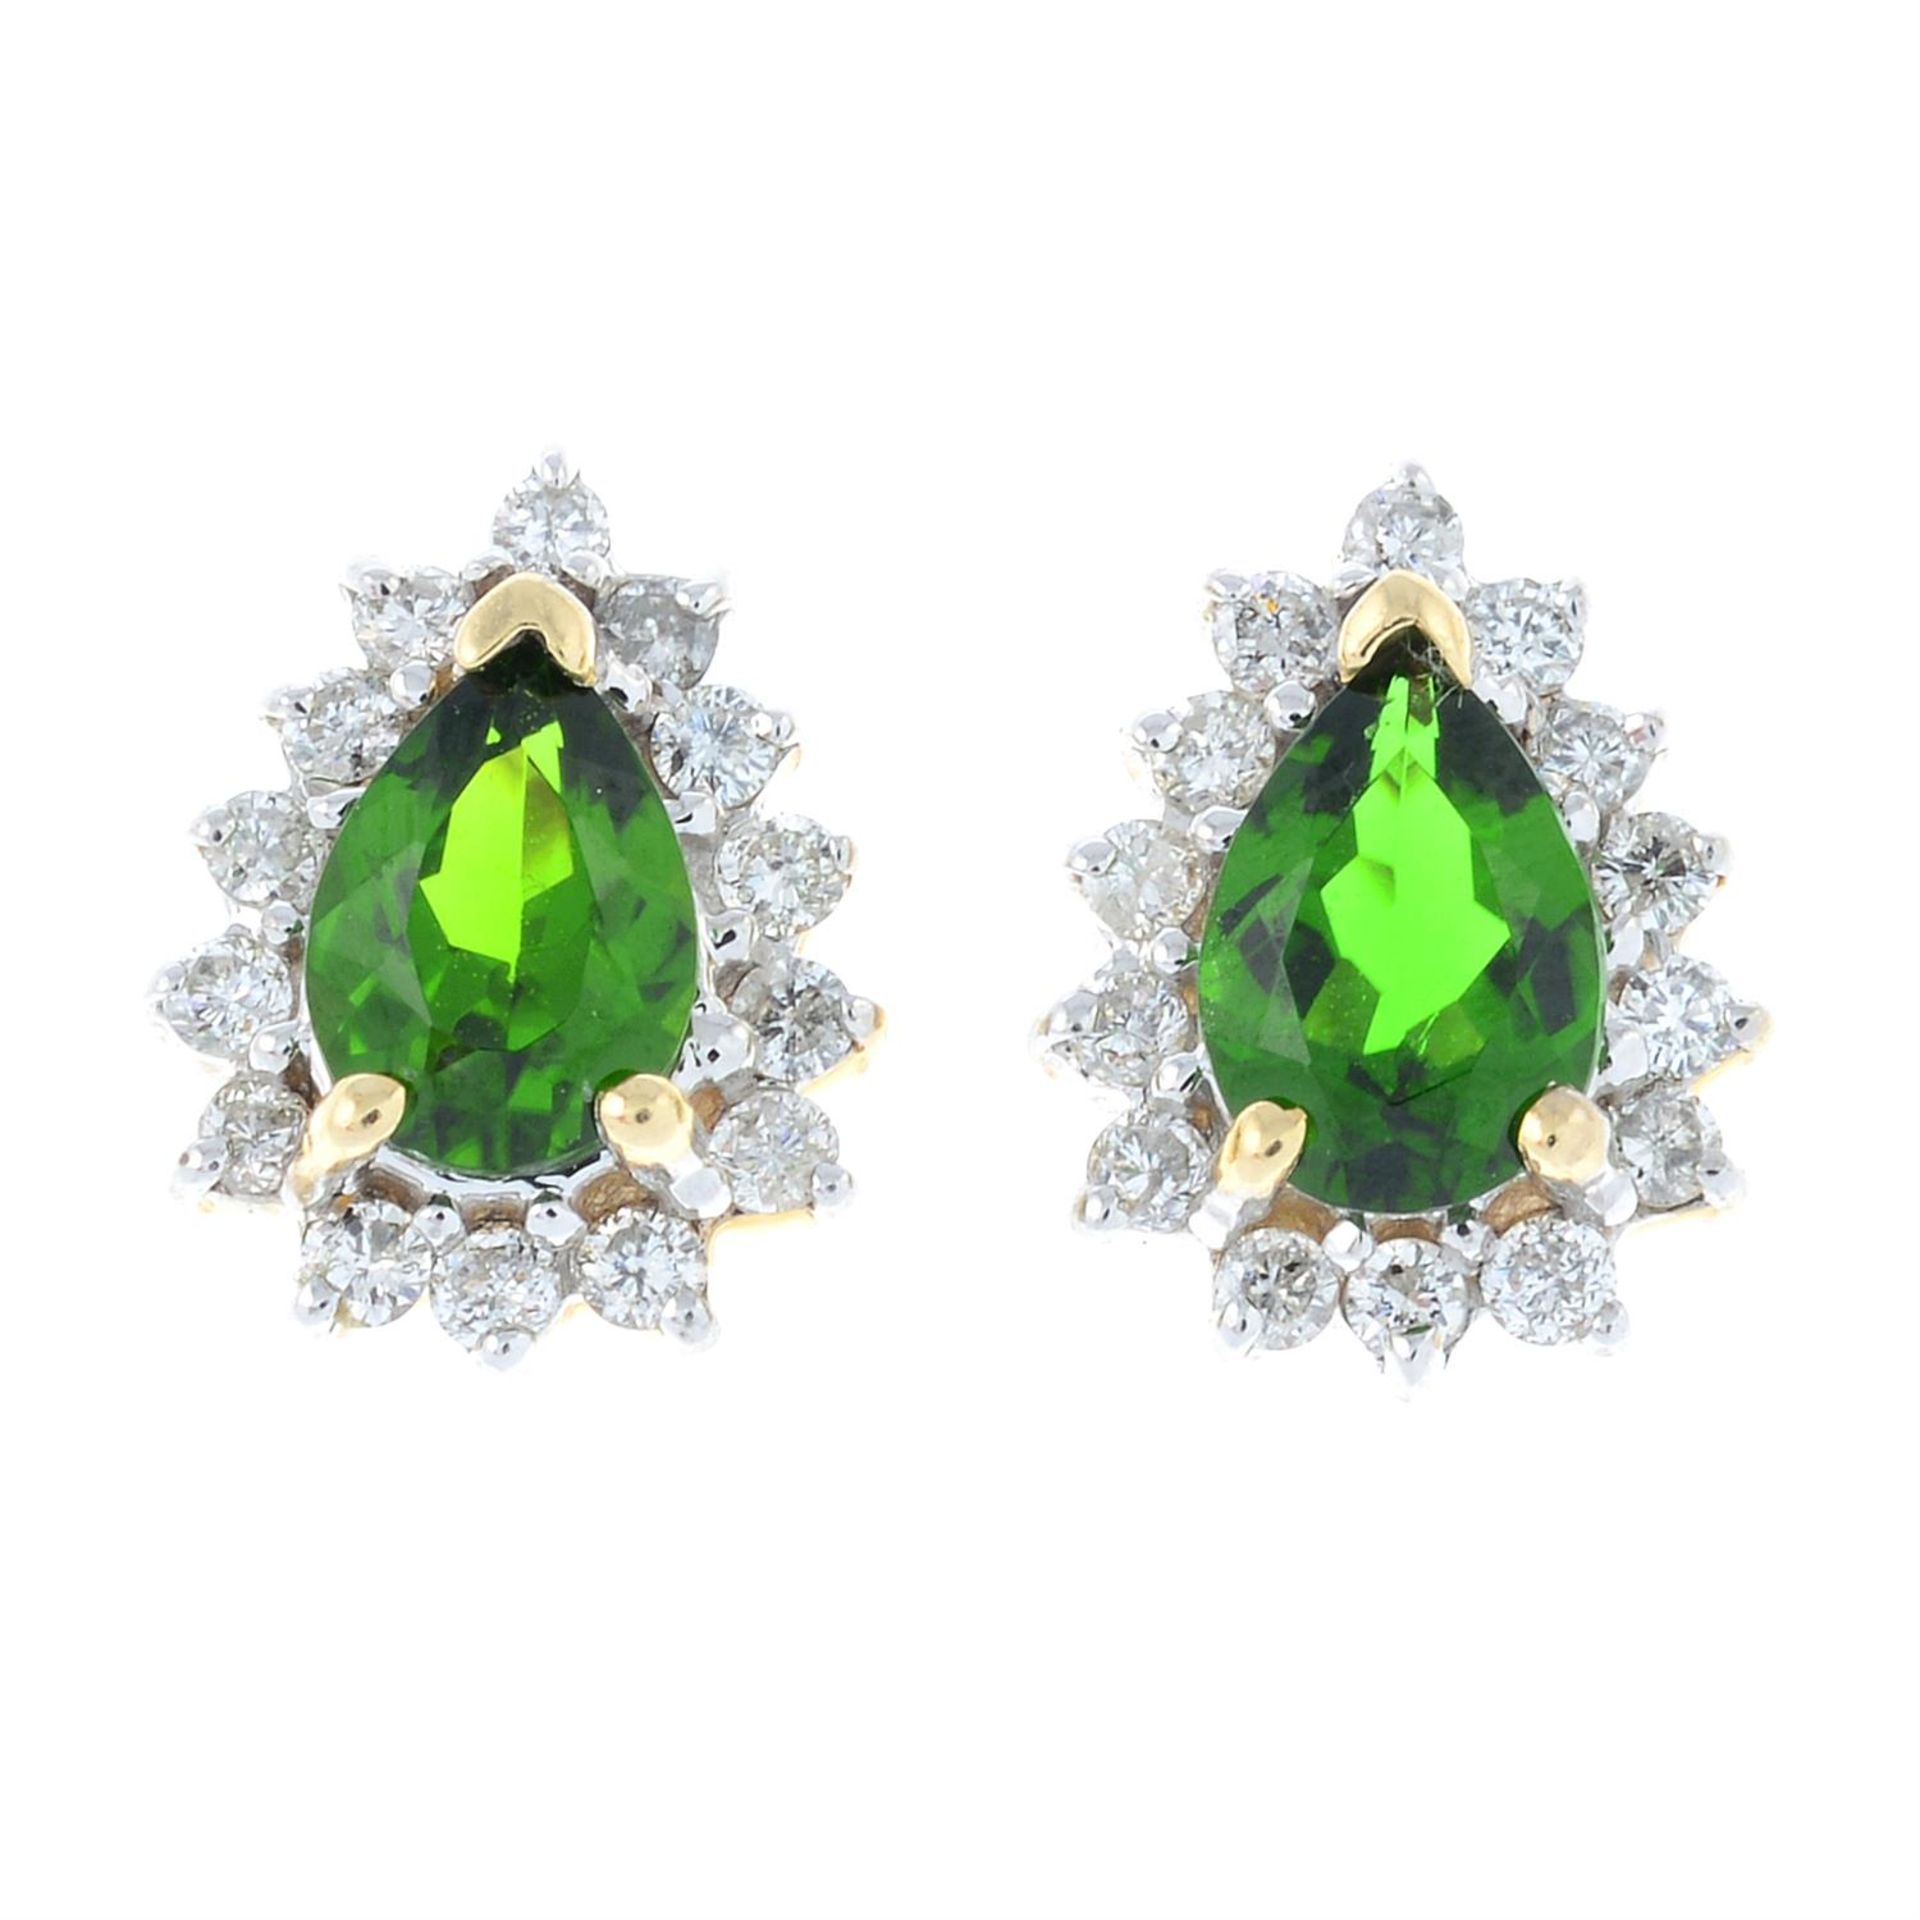 A pair of tourmaline and diamond cluster stud earrings.